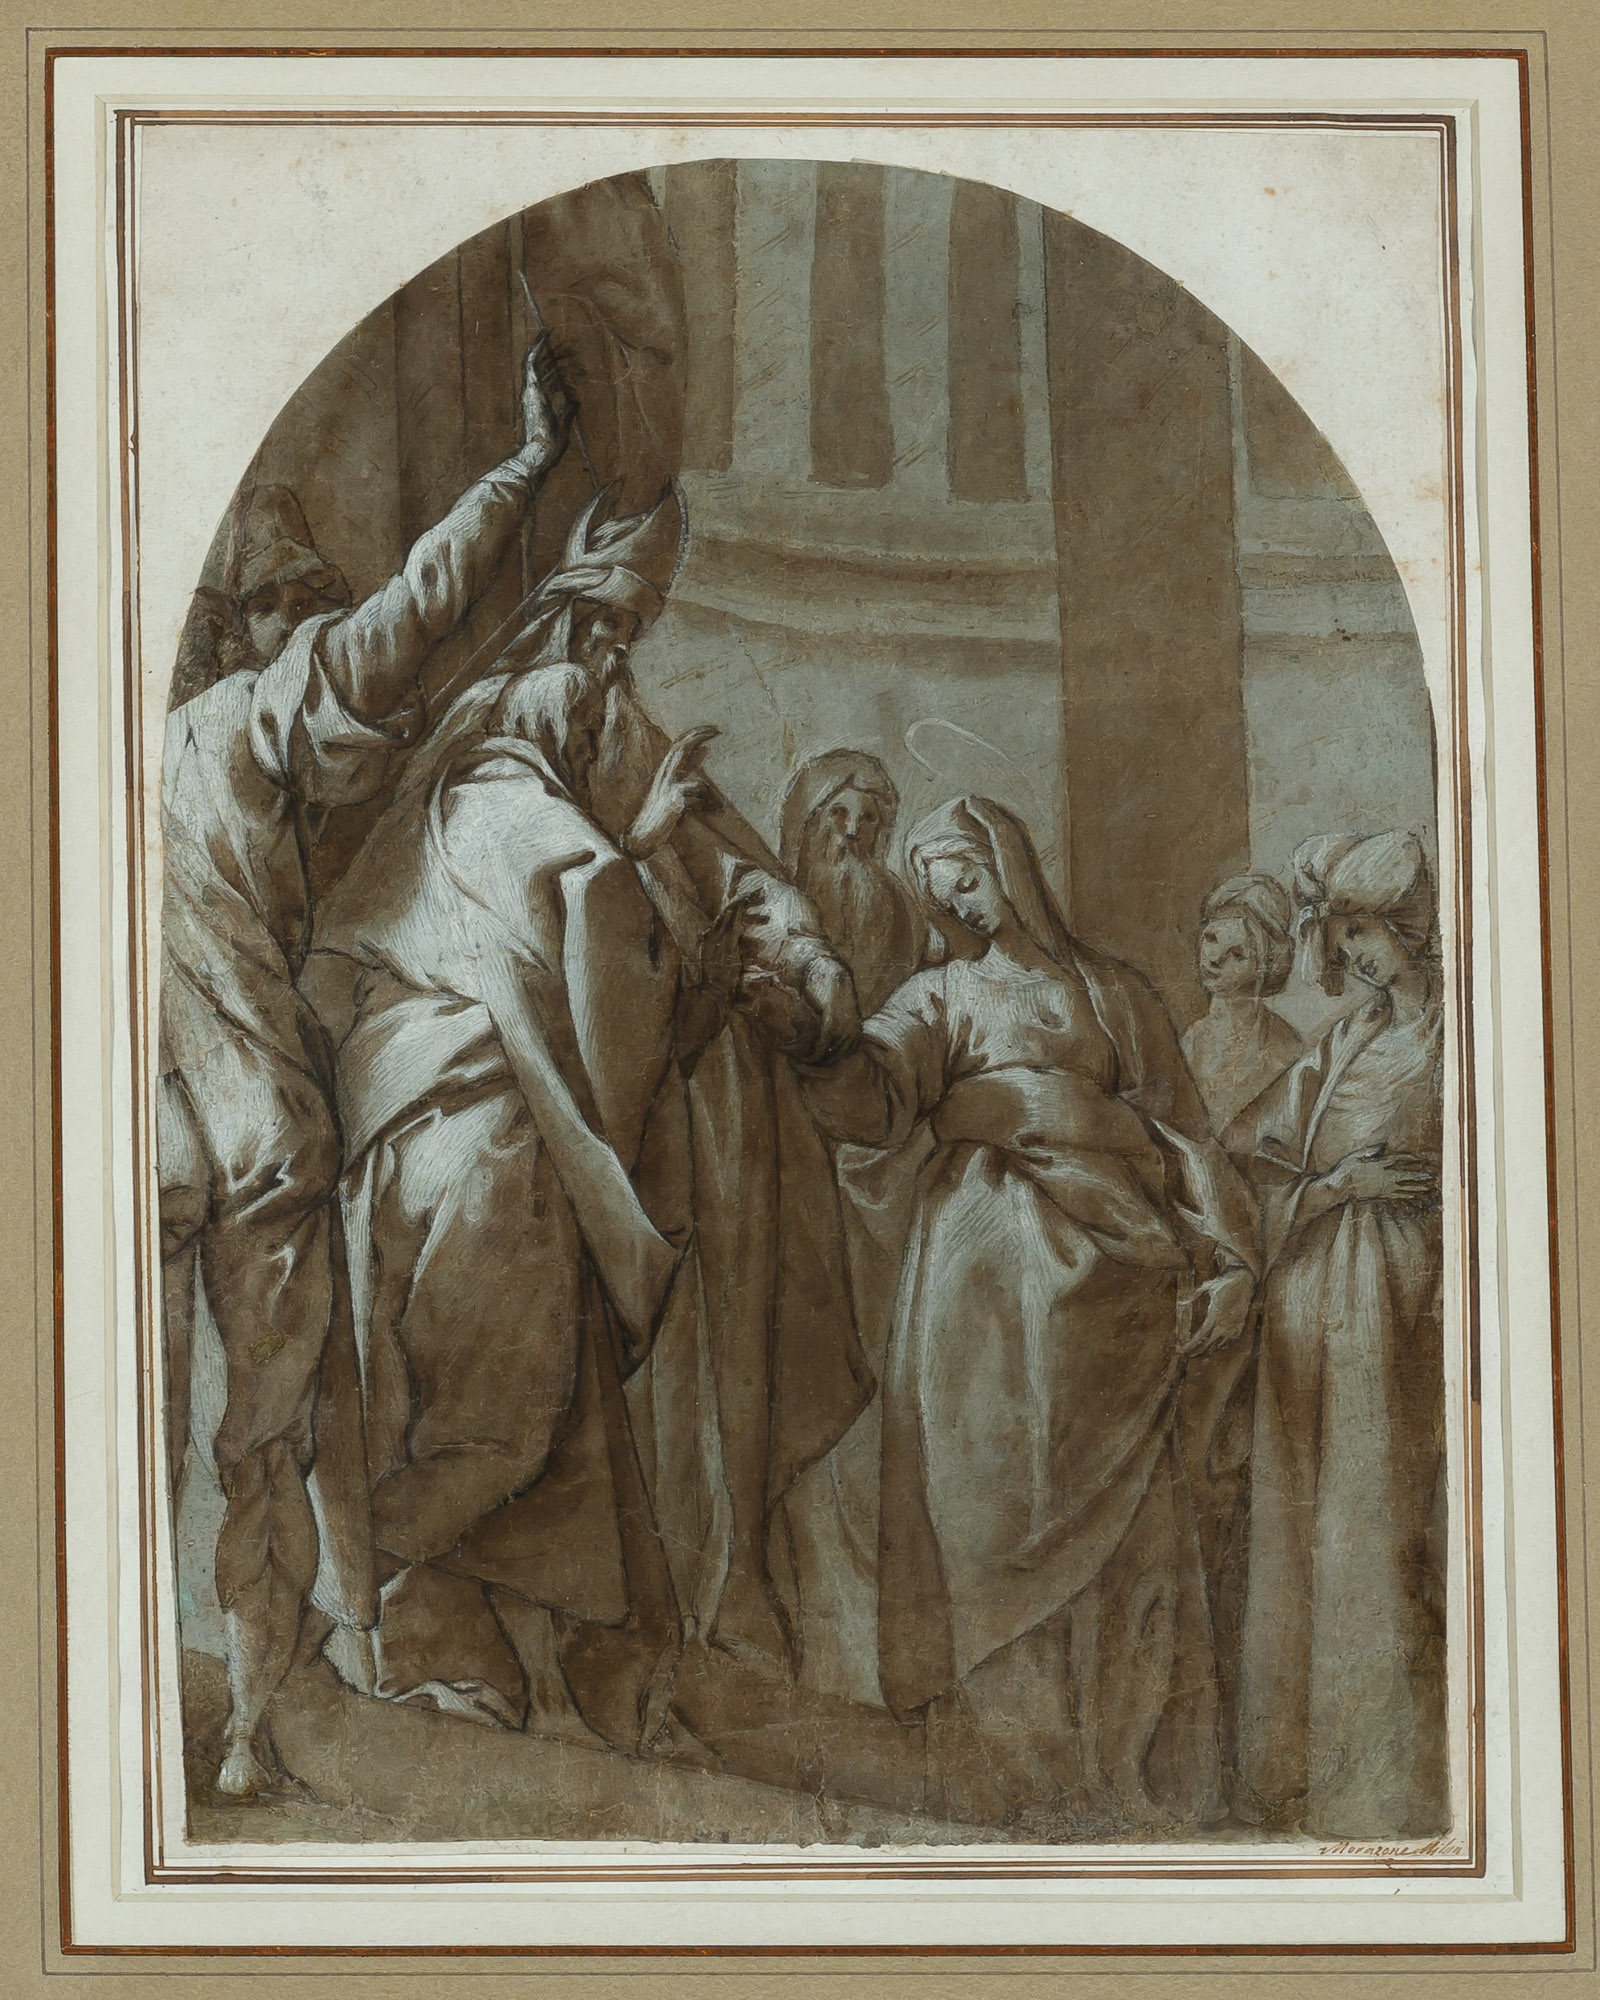 The Betrothal of the Virgin by Morazzone, 1005